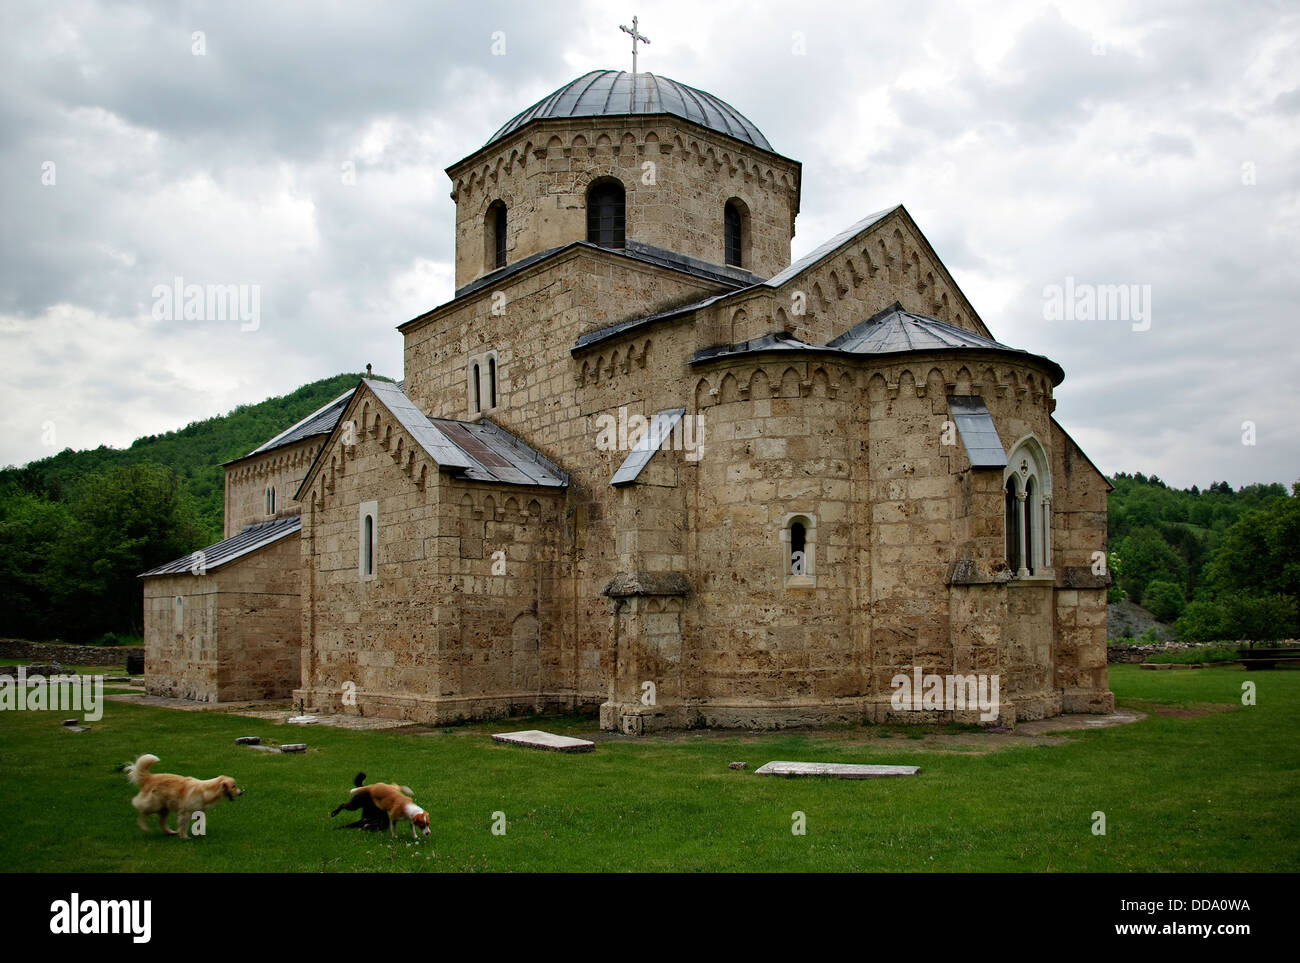 Serbian Orthodox monastery Gradac is located in the central part of Serbia, near the town of Raska. Stock Photo